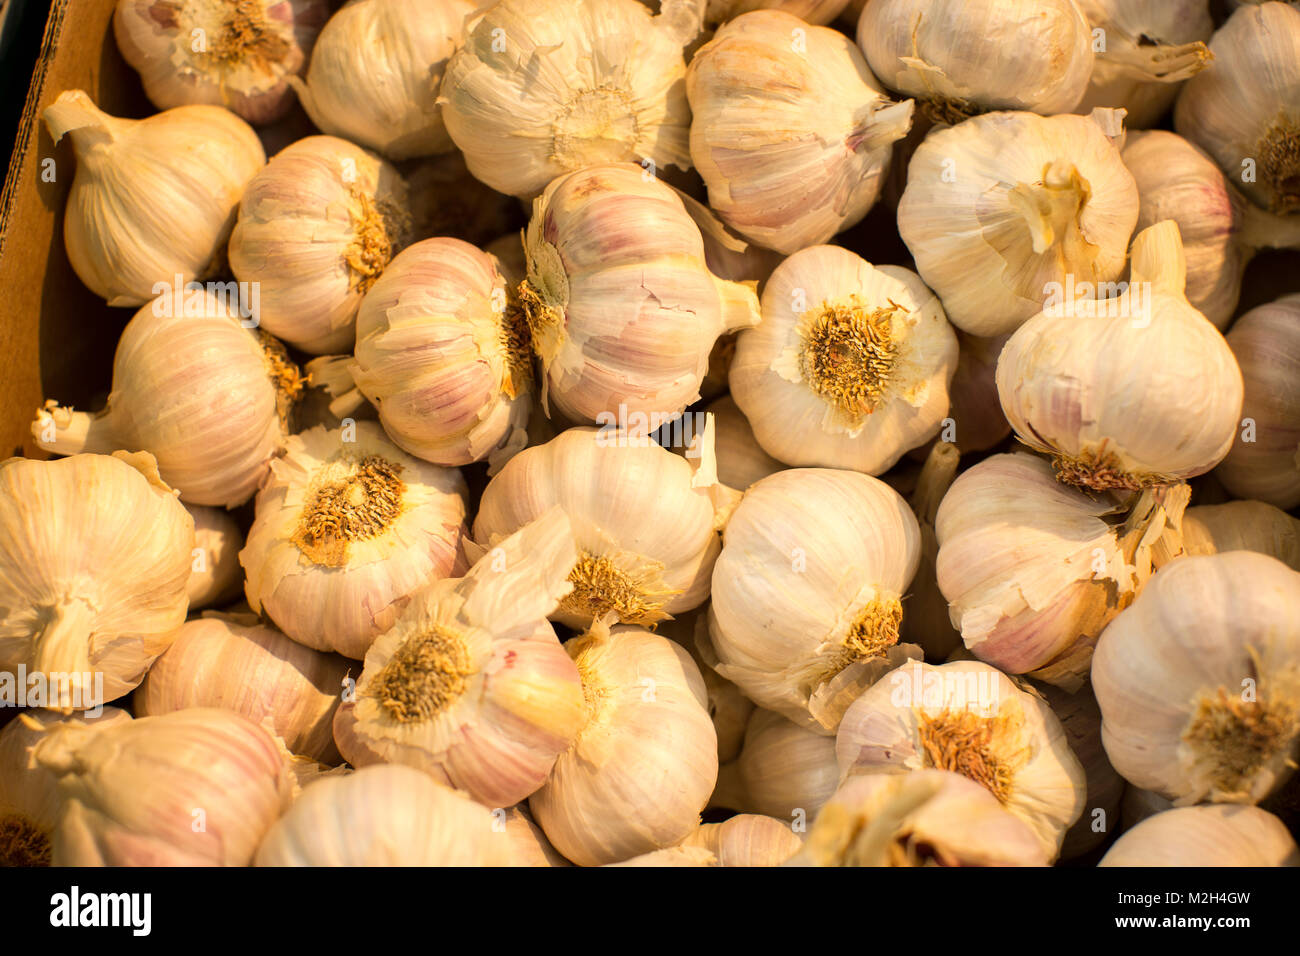 garlic bulbs for sale in a supermarket Stock Photo